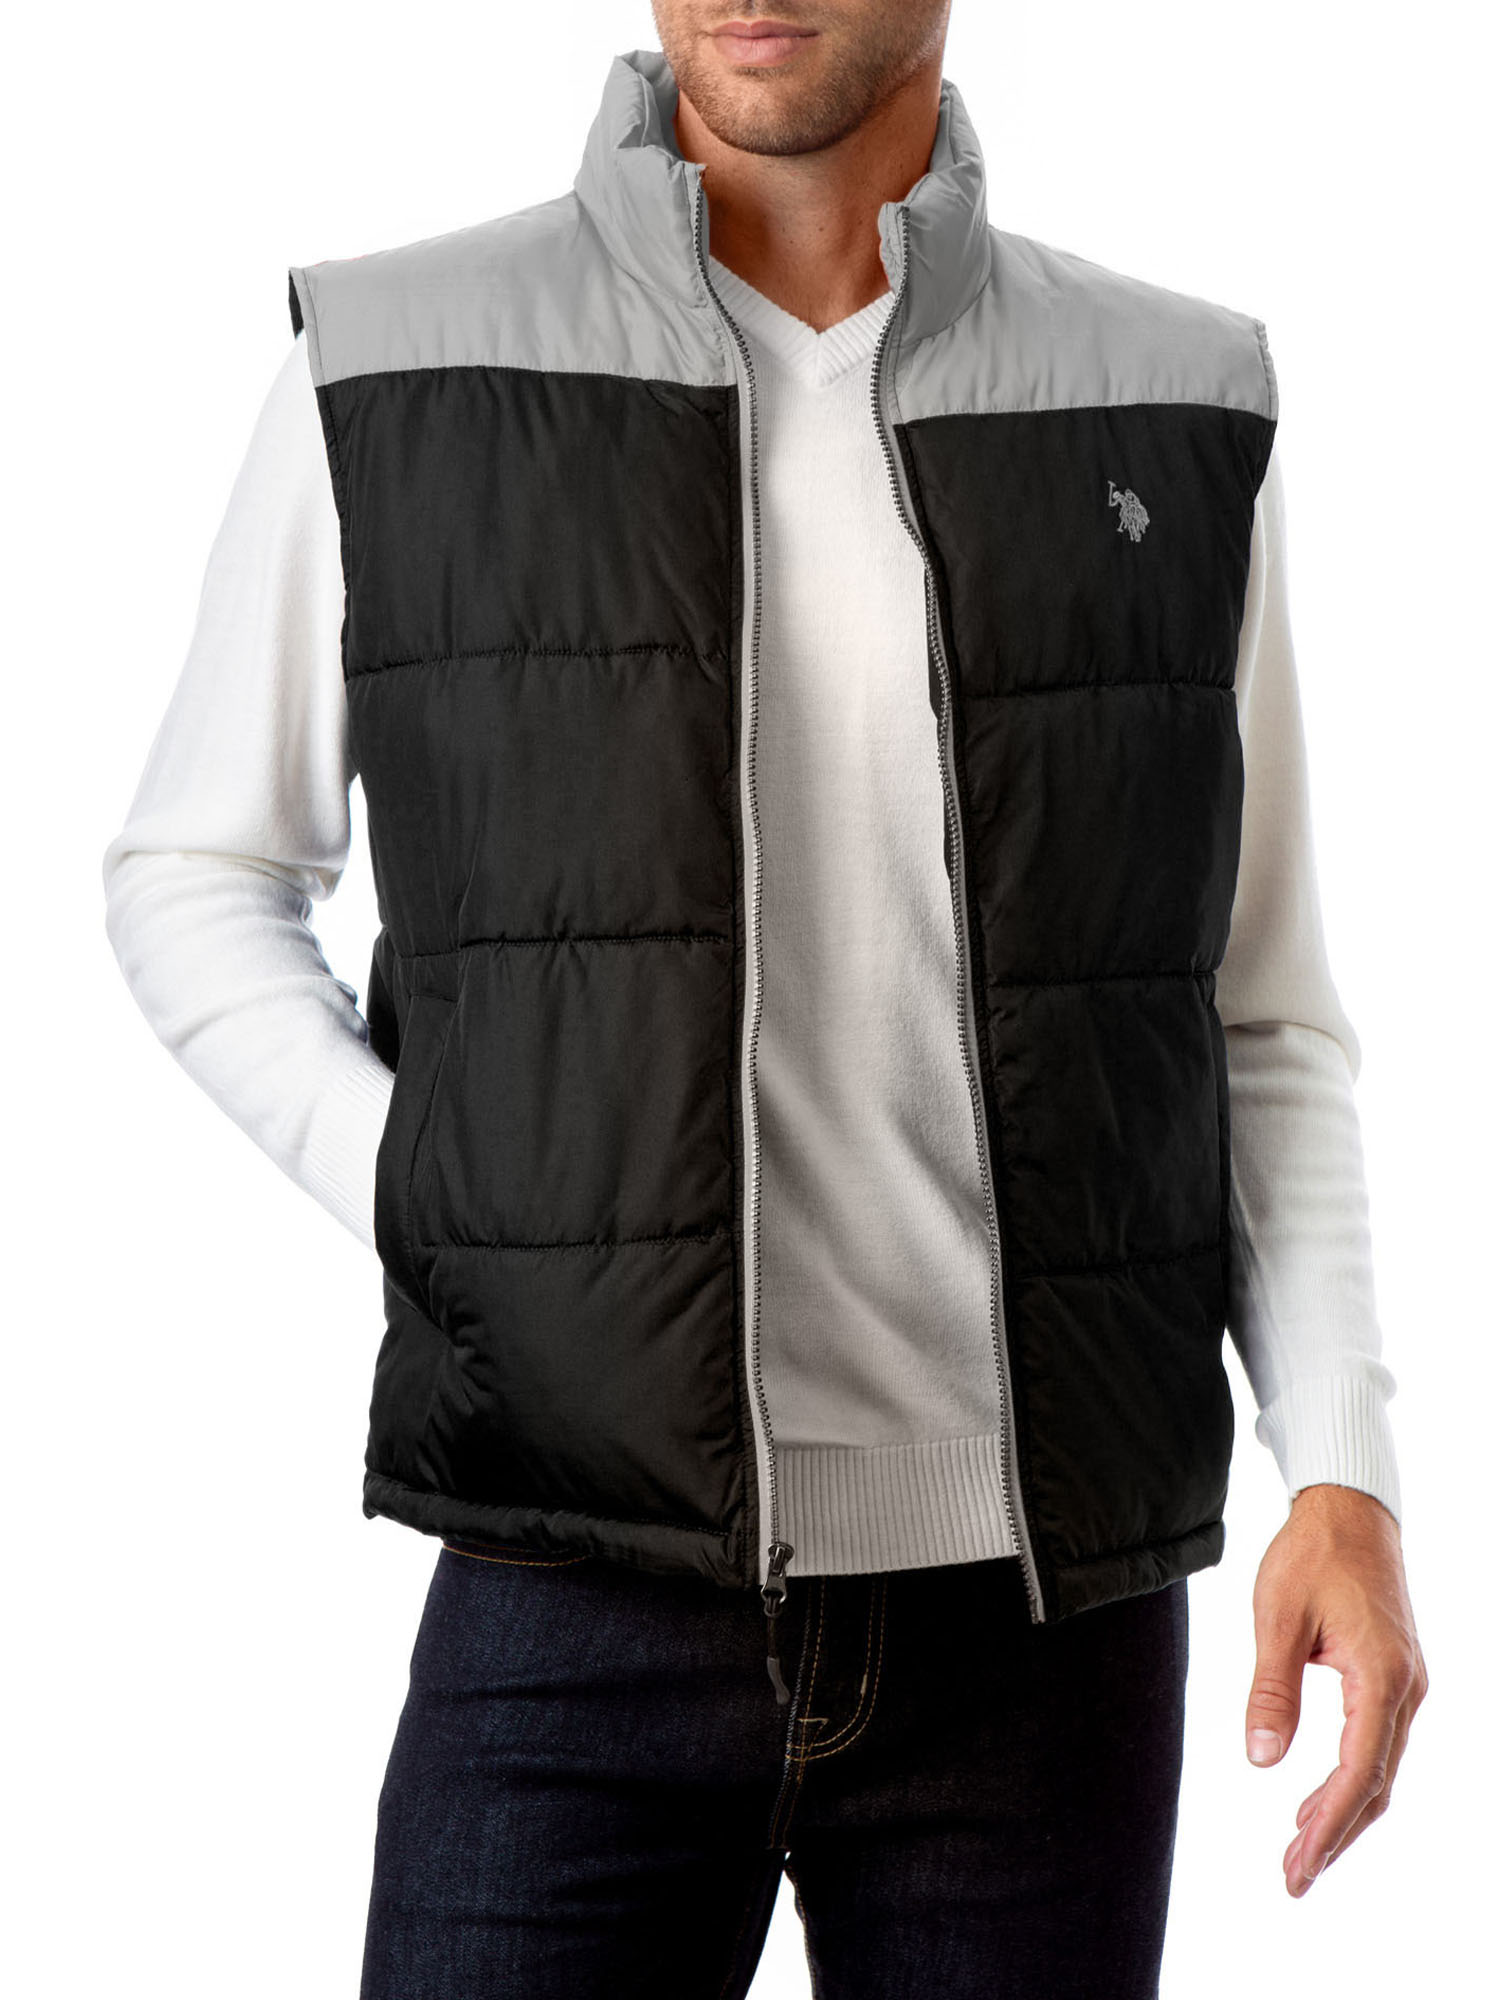 U.S. Polo Assn. Puffer Vest - image 1 of 5